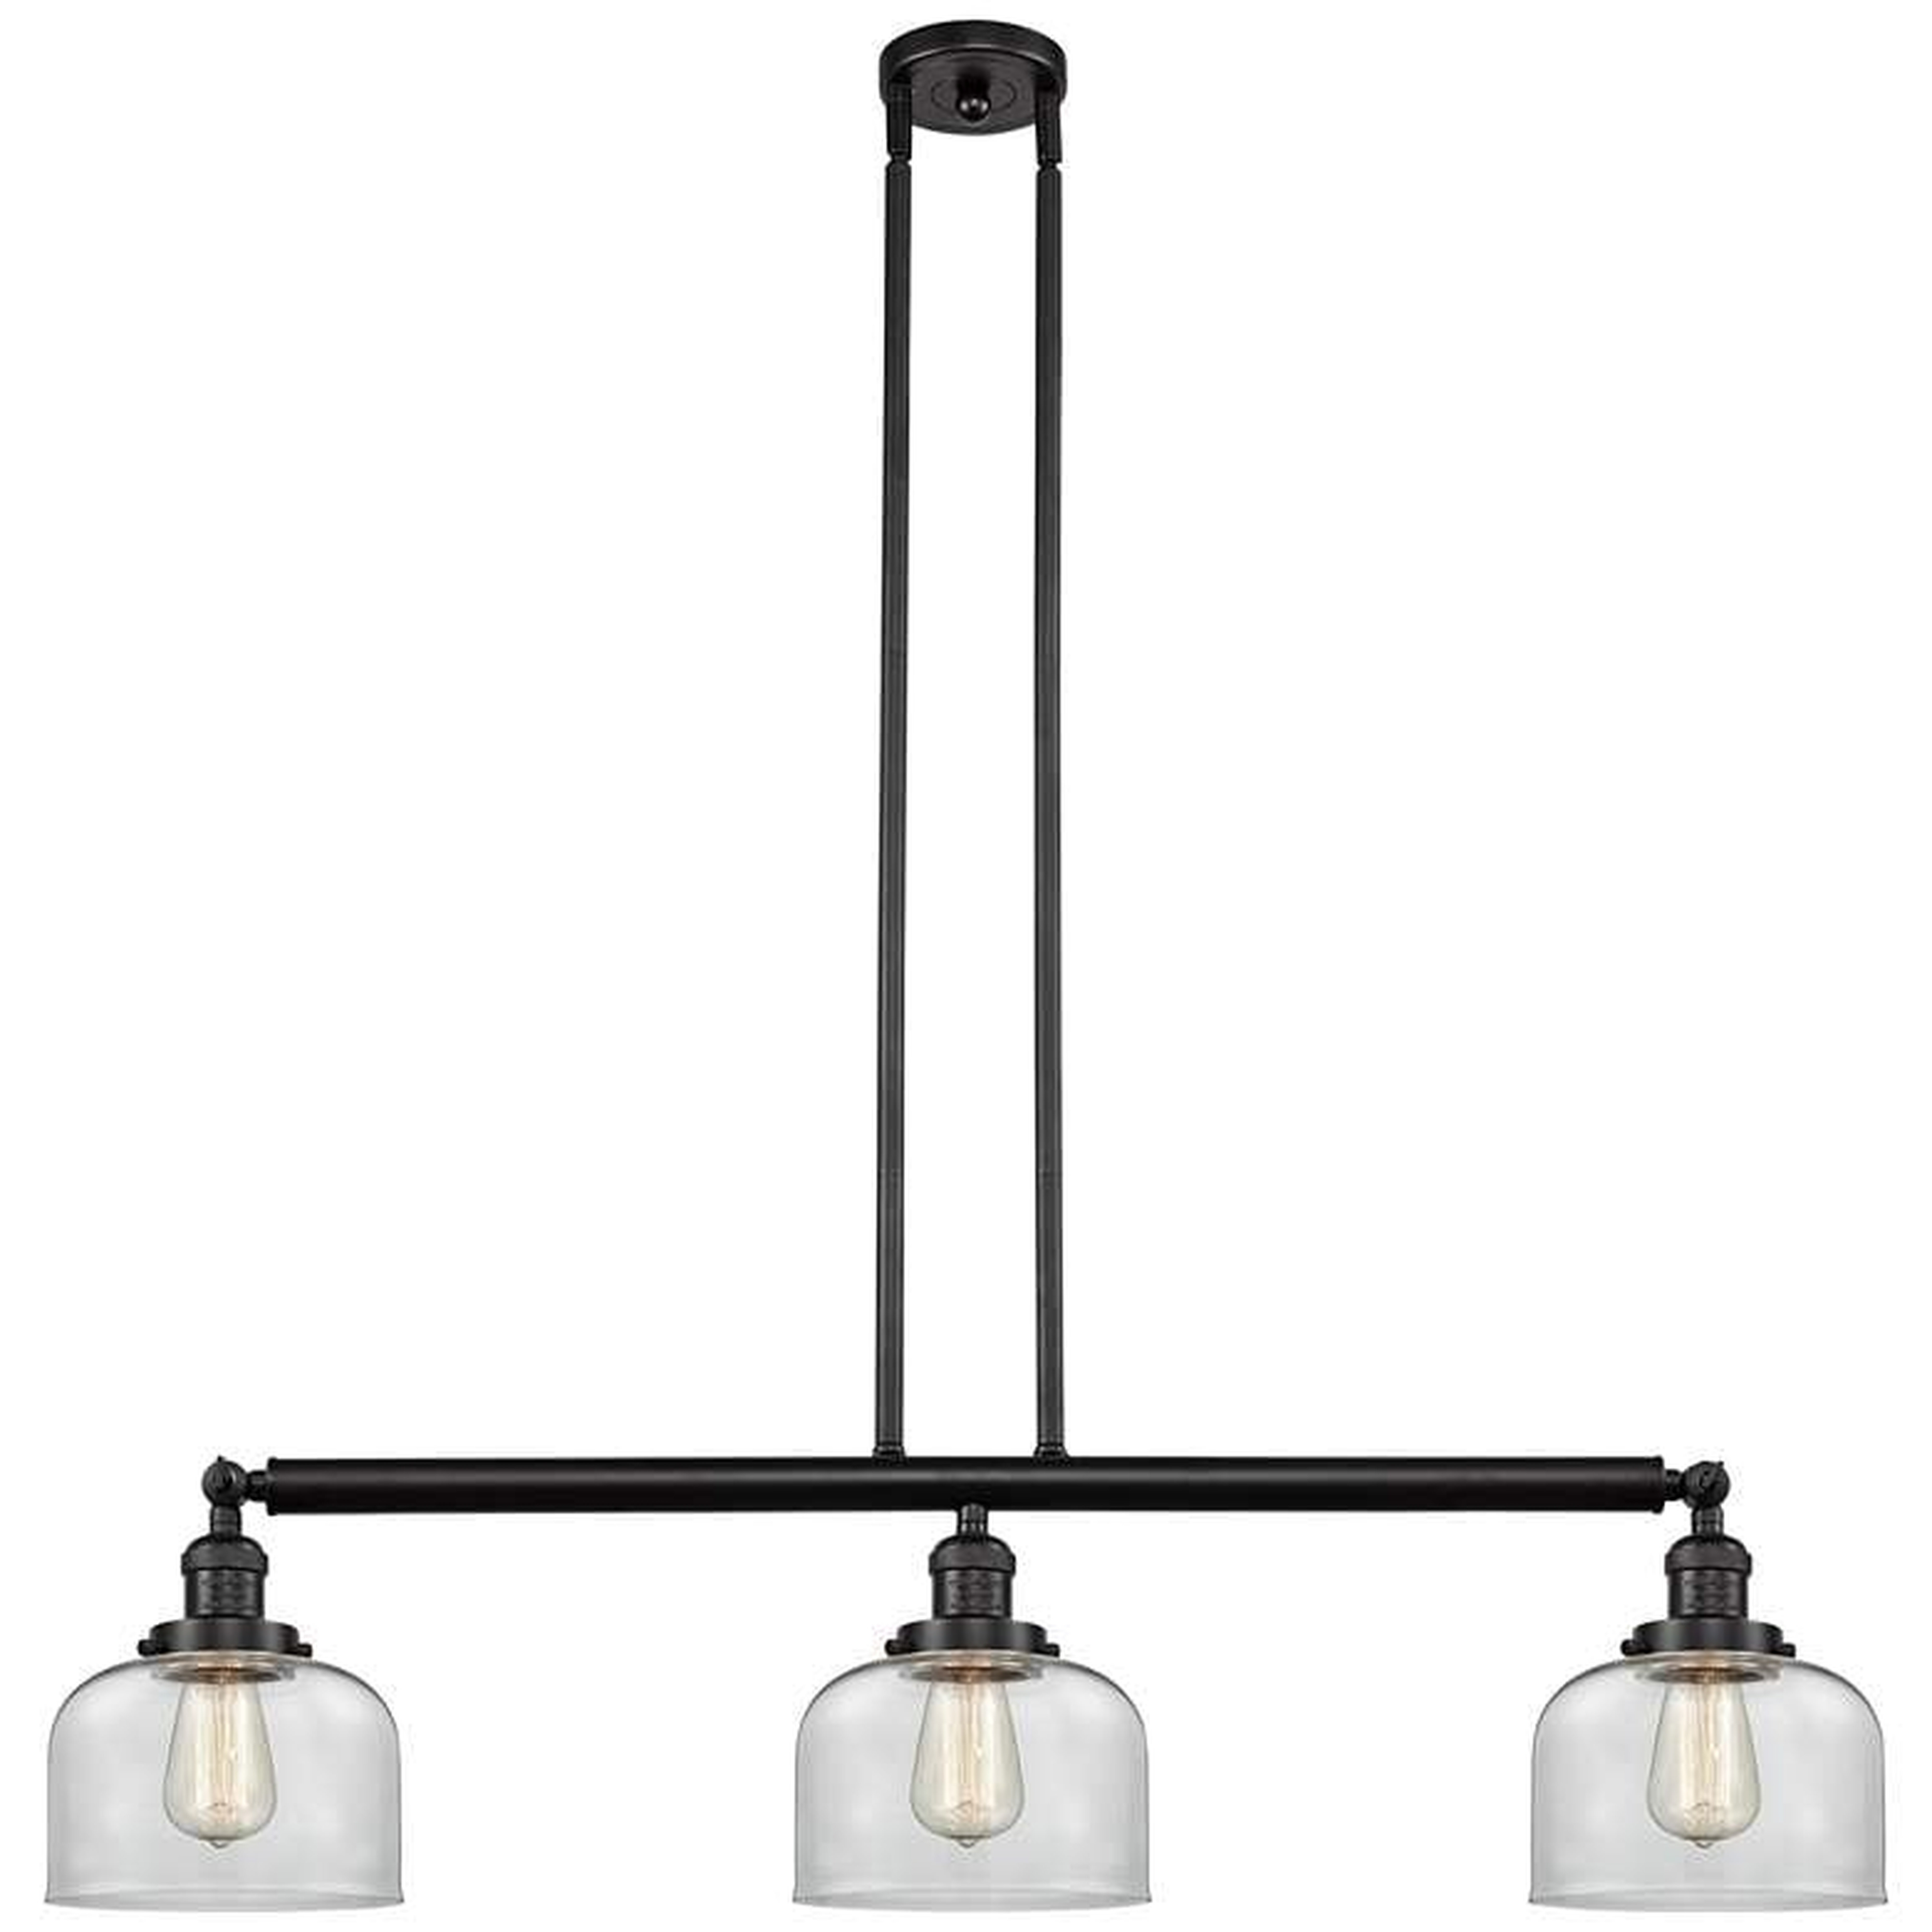 Large Bell 40 1/2"W Oil-Rubbed Bronze 3-Light Island Pendant - Style # 65V98 - Lamps Plus